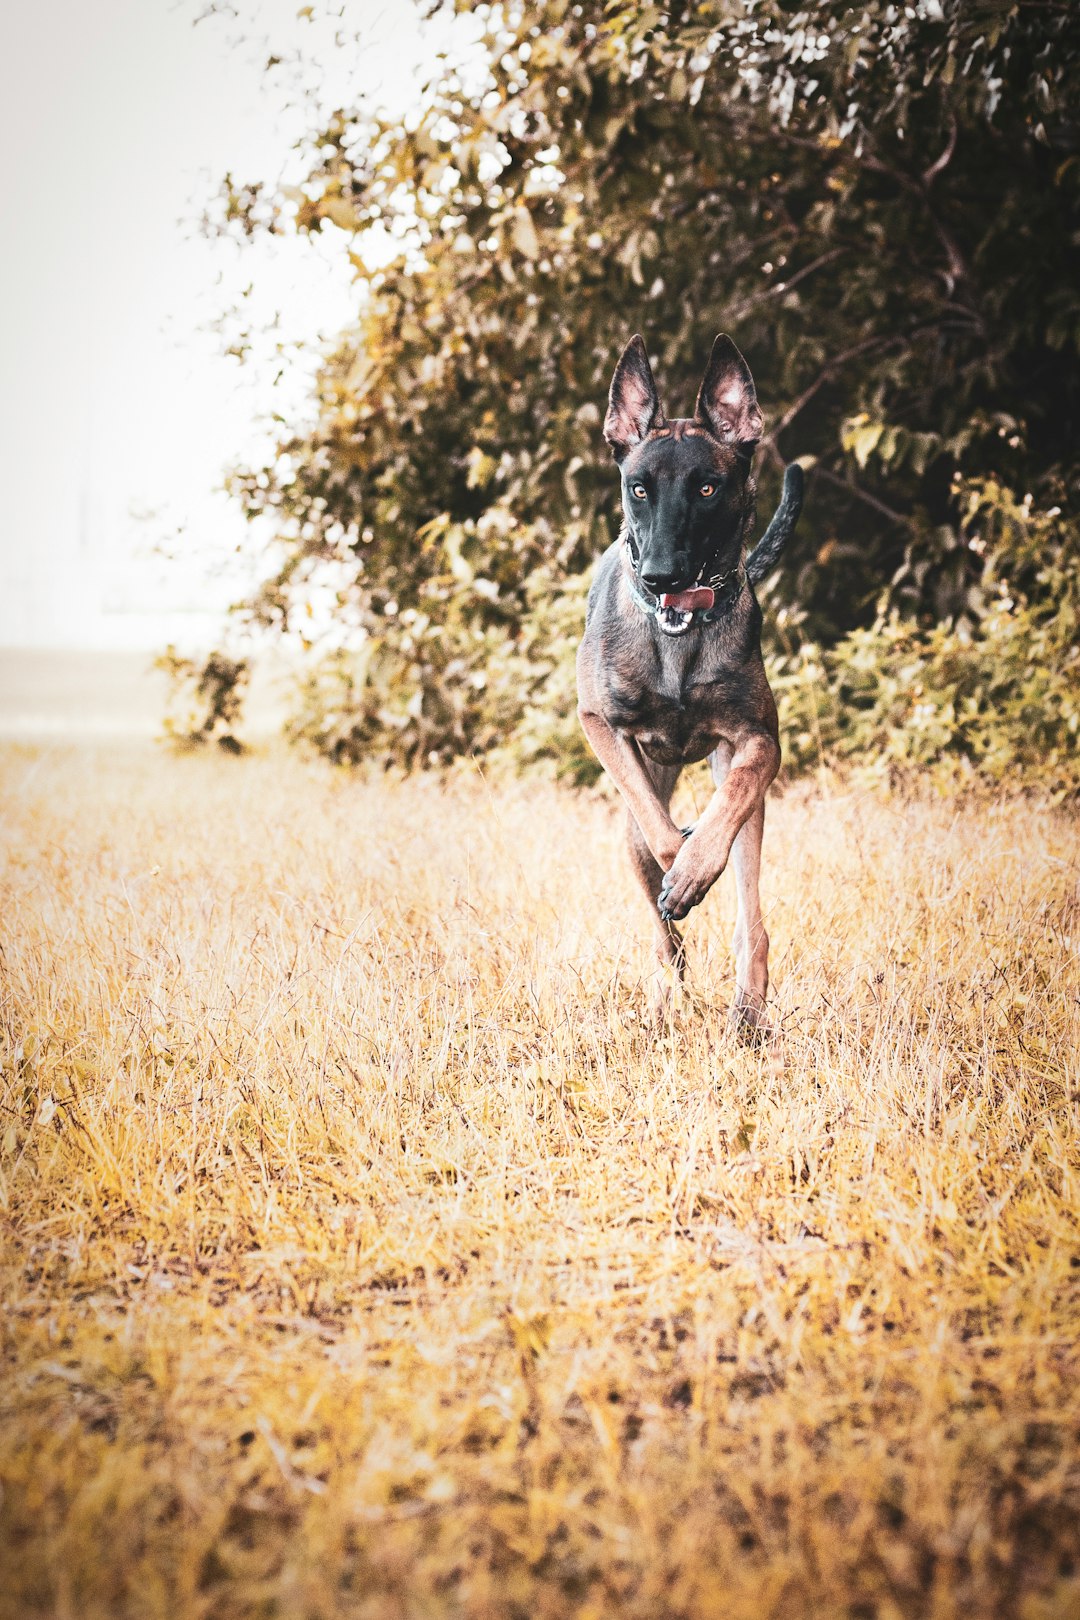 black and brown short coated dog running on brown grass field during daytime